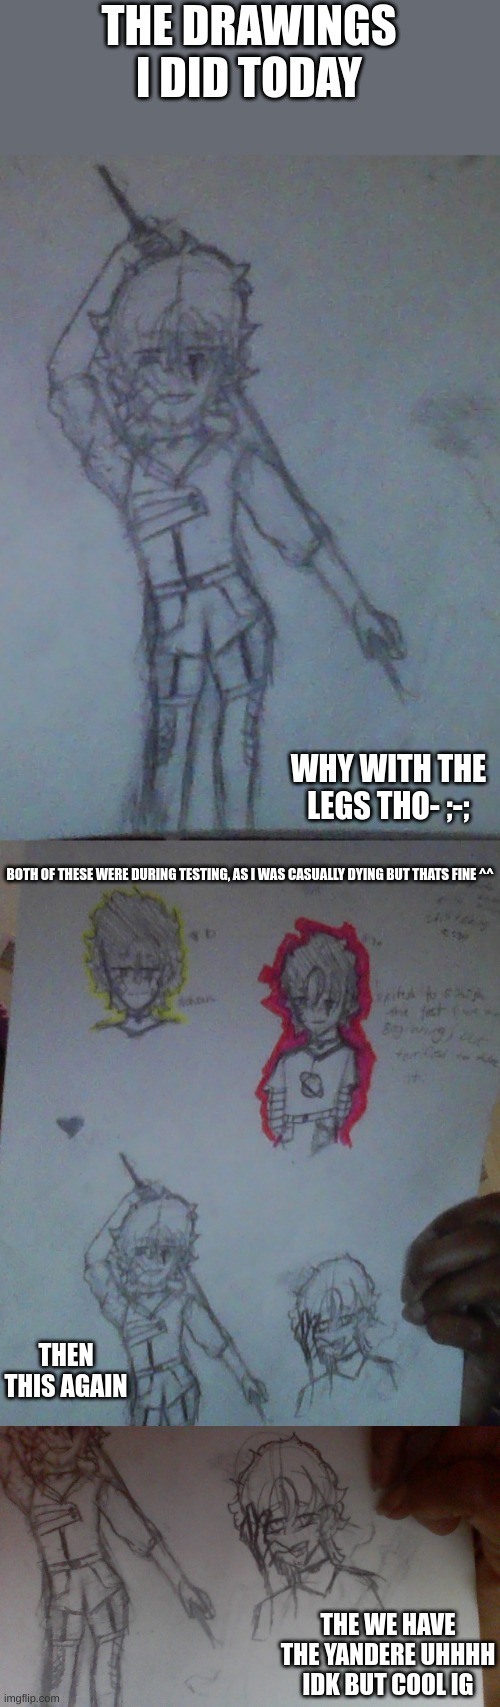 Hello and good bye (i gotta go in like 5 mins but i jus wanted to post somethin) | THE DRAWINGS I DID TODAY; WHY WITH THE LEGS THO- ;-;; BOTH OF THESE WERE DURING TESTING, AS I WAS CASUALLY DYING BUT THATS FINE ^^; THEN THIS AGAIN; THE WE HAVE THE YANDERE UHHHH IDK BUT COOL IG | made w/ Imgflip meme maker